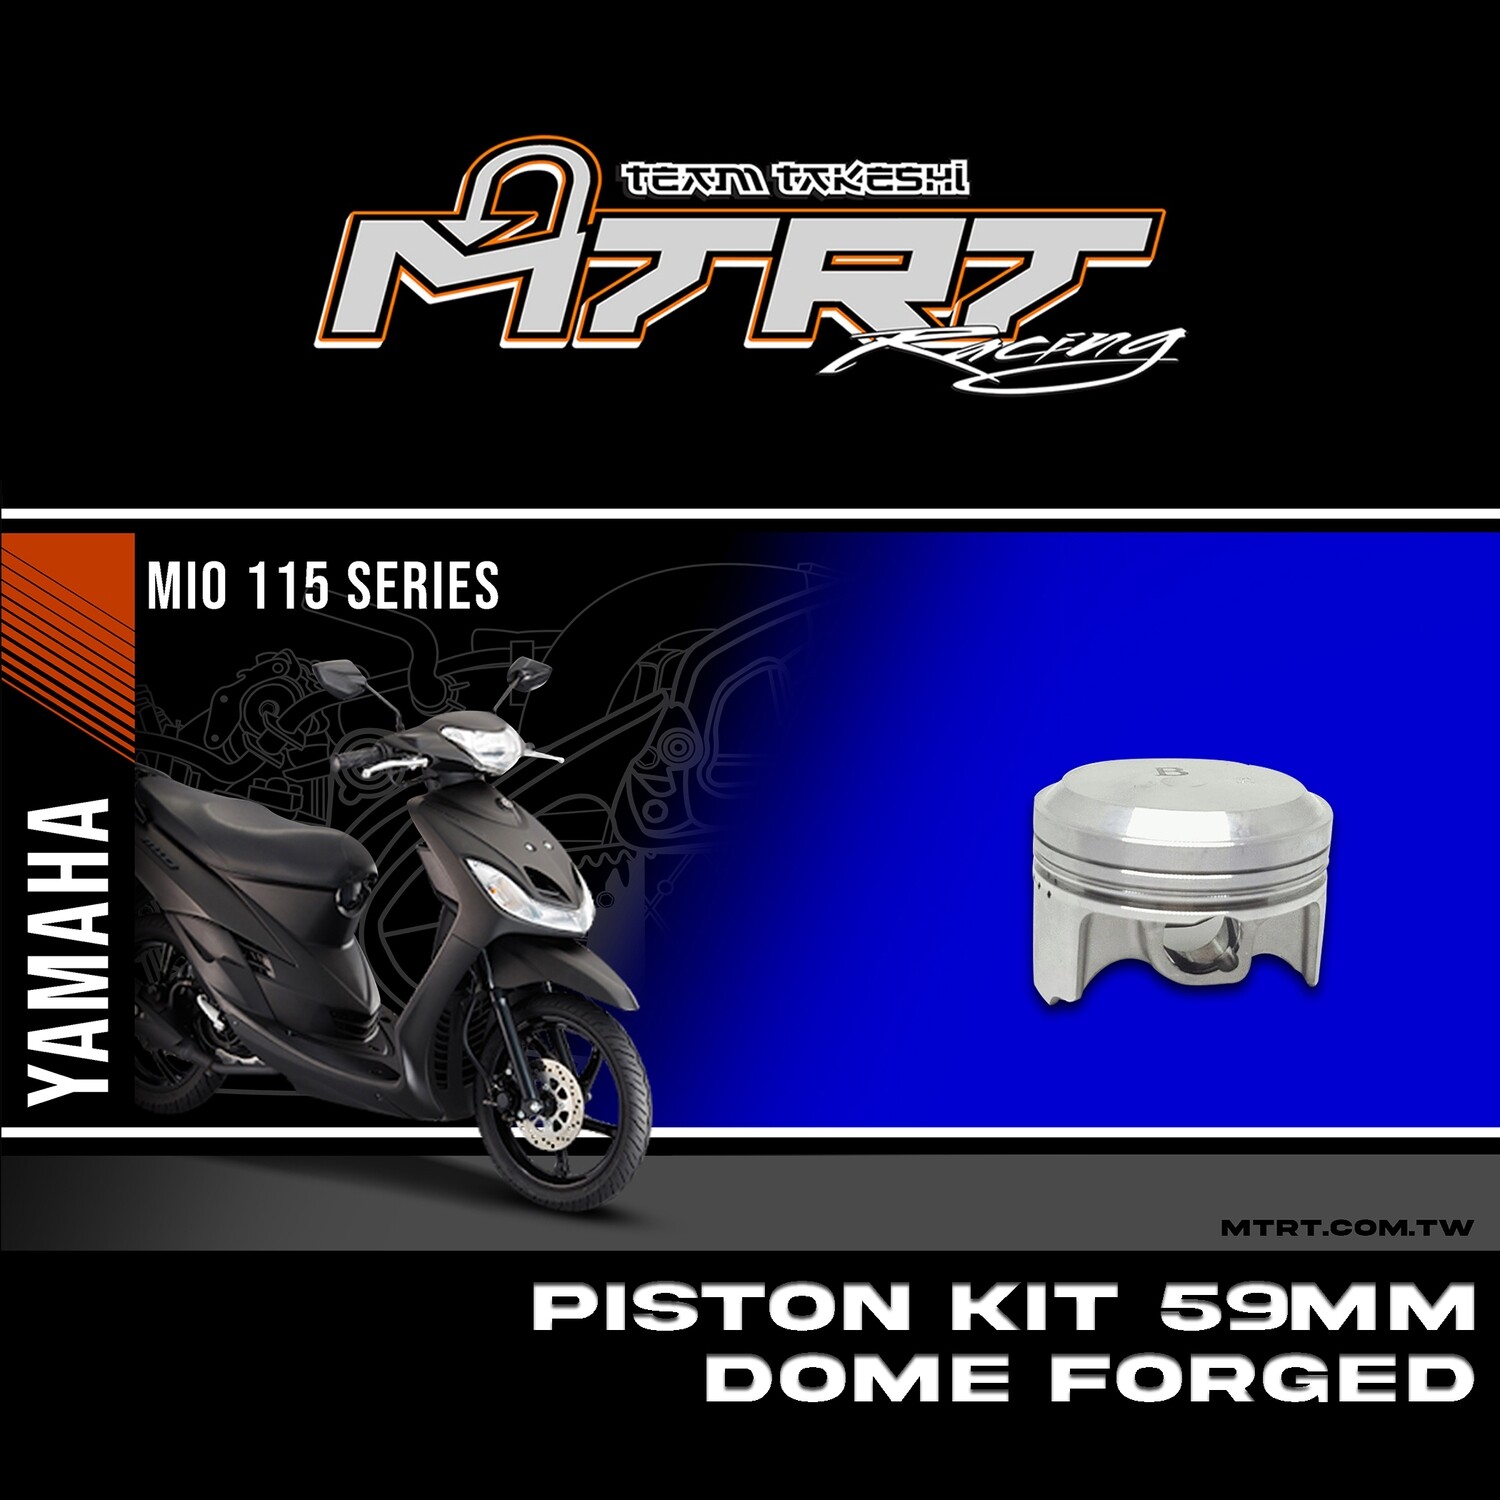 PISTON KIT 59MM DOME FORGED